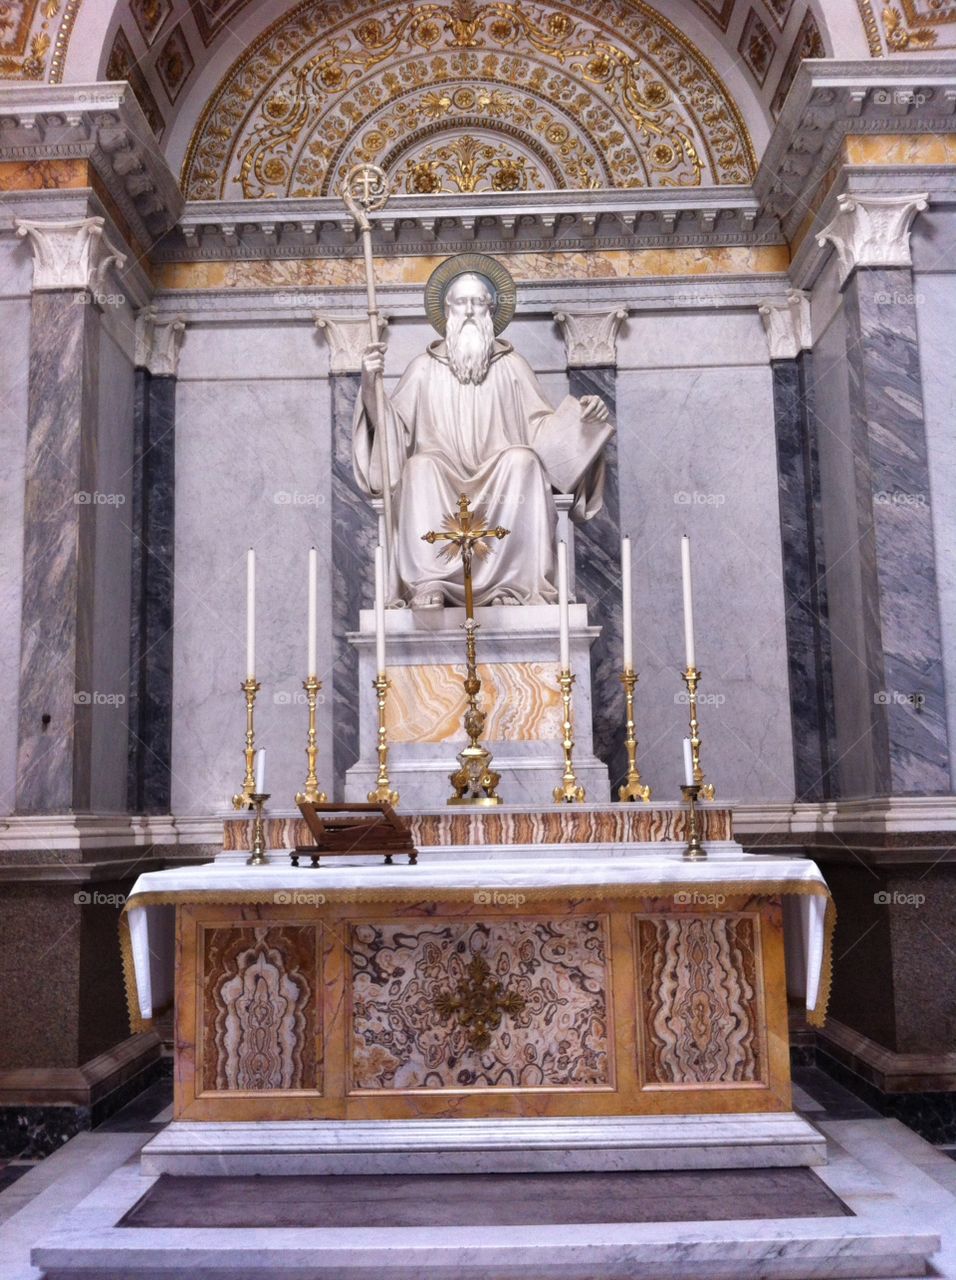 St Benedict in Rome. The altar in a chapel of St Benedict, located in the Basilica of St Paul Beyond the Walls, Rome.